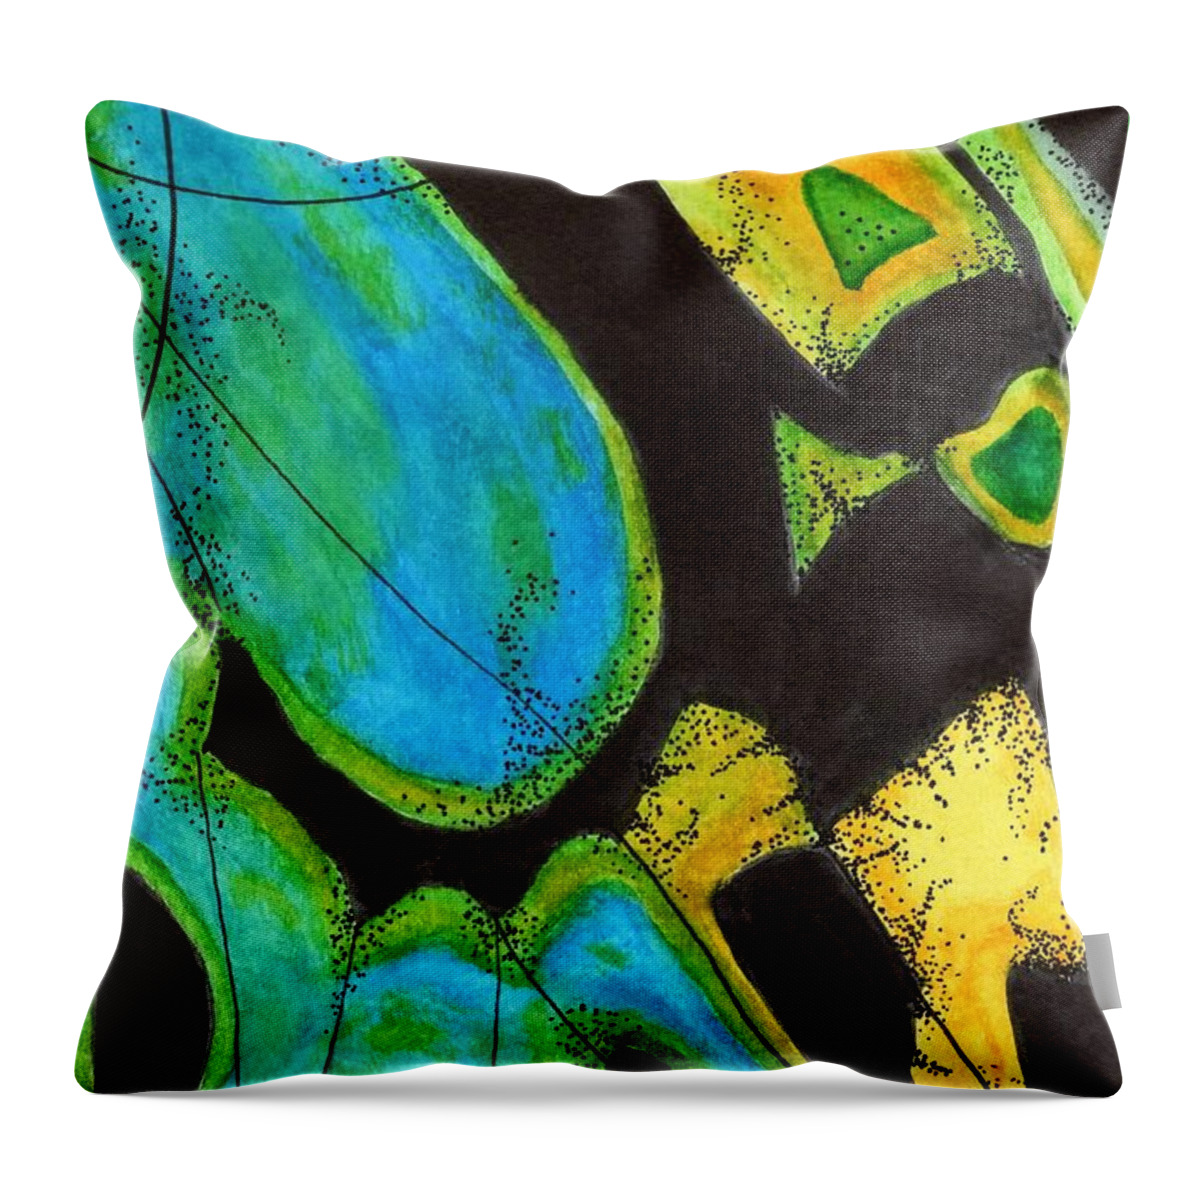 Yellow Throw Pillow featuring the painting Malachite by Misty Morehead